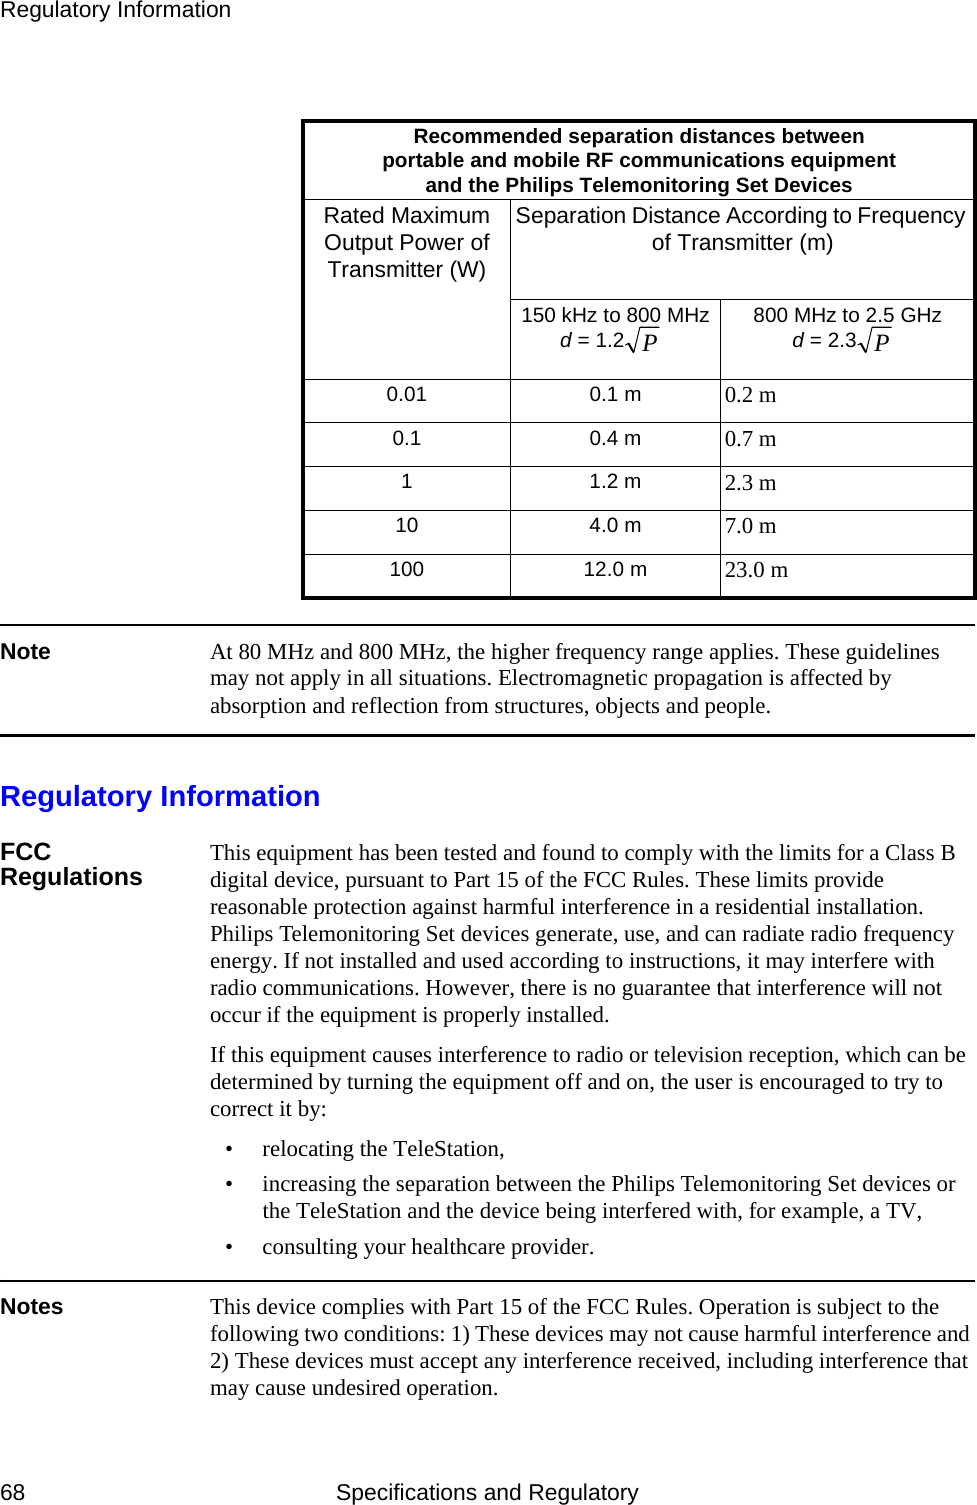 Regulatory Information68 Specifications and RegulatoryNote At 80 MHz and 800 MHz, the higher frequency range applies. These guidelines may not apply in all situations. Electromagnetic propagation is affected by absorption and reflection from structures, objects and people.Regulatory InformationFCC Regulations This equipment has been tested and found to comply with the limits for a Class B digital device, pursuant to Part 15 of the FCC Rules. These limits provide reasonable protection against harmful interference in a residential installation. Philips Telemonitoring Set devices generate, use, and can radiate radio frequency energy. If not installed and used according to instructions, it may interfere with radio communications. However, there is no guarantee that interference will not occur if the equipment is properly installed.If this equipment causes interference to radio or television reception, which can be determined by turning the equipment off and on, the user is encouraged to try to correct it by:• relocating the TeleStation,• increasing the separation between the Philips Telemonitoring Set devices or the TeleStation and the device being interfered with, for example, a TV,• consulting your healthcare provider.Notes This device complies with Part 15 of the FCC Rules. Operation is subject to the following two conditions: 1) These devices may not cause harmful interference and 2) These devices must accept any interference received, including interference that may cause undesired operation. Recommended separation distances between portable and mobile RF communications equipment and the Philips Telemonitoring Set DevicesRated Maximum Output Power of Transmitter (W)Separation Distance According to Frequency of Transmitter (m) 150 kHz to 800 MHzd = 1.2 800 MHz to 2.5 GHzd = 2.30.01 0.1 m 0.2 m0.1 0.4 m 0.7 m1 1.2 m 2.3 m10 4.0 m 7.0 m100 12.0 m 23.0 mPP